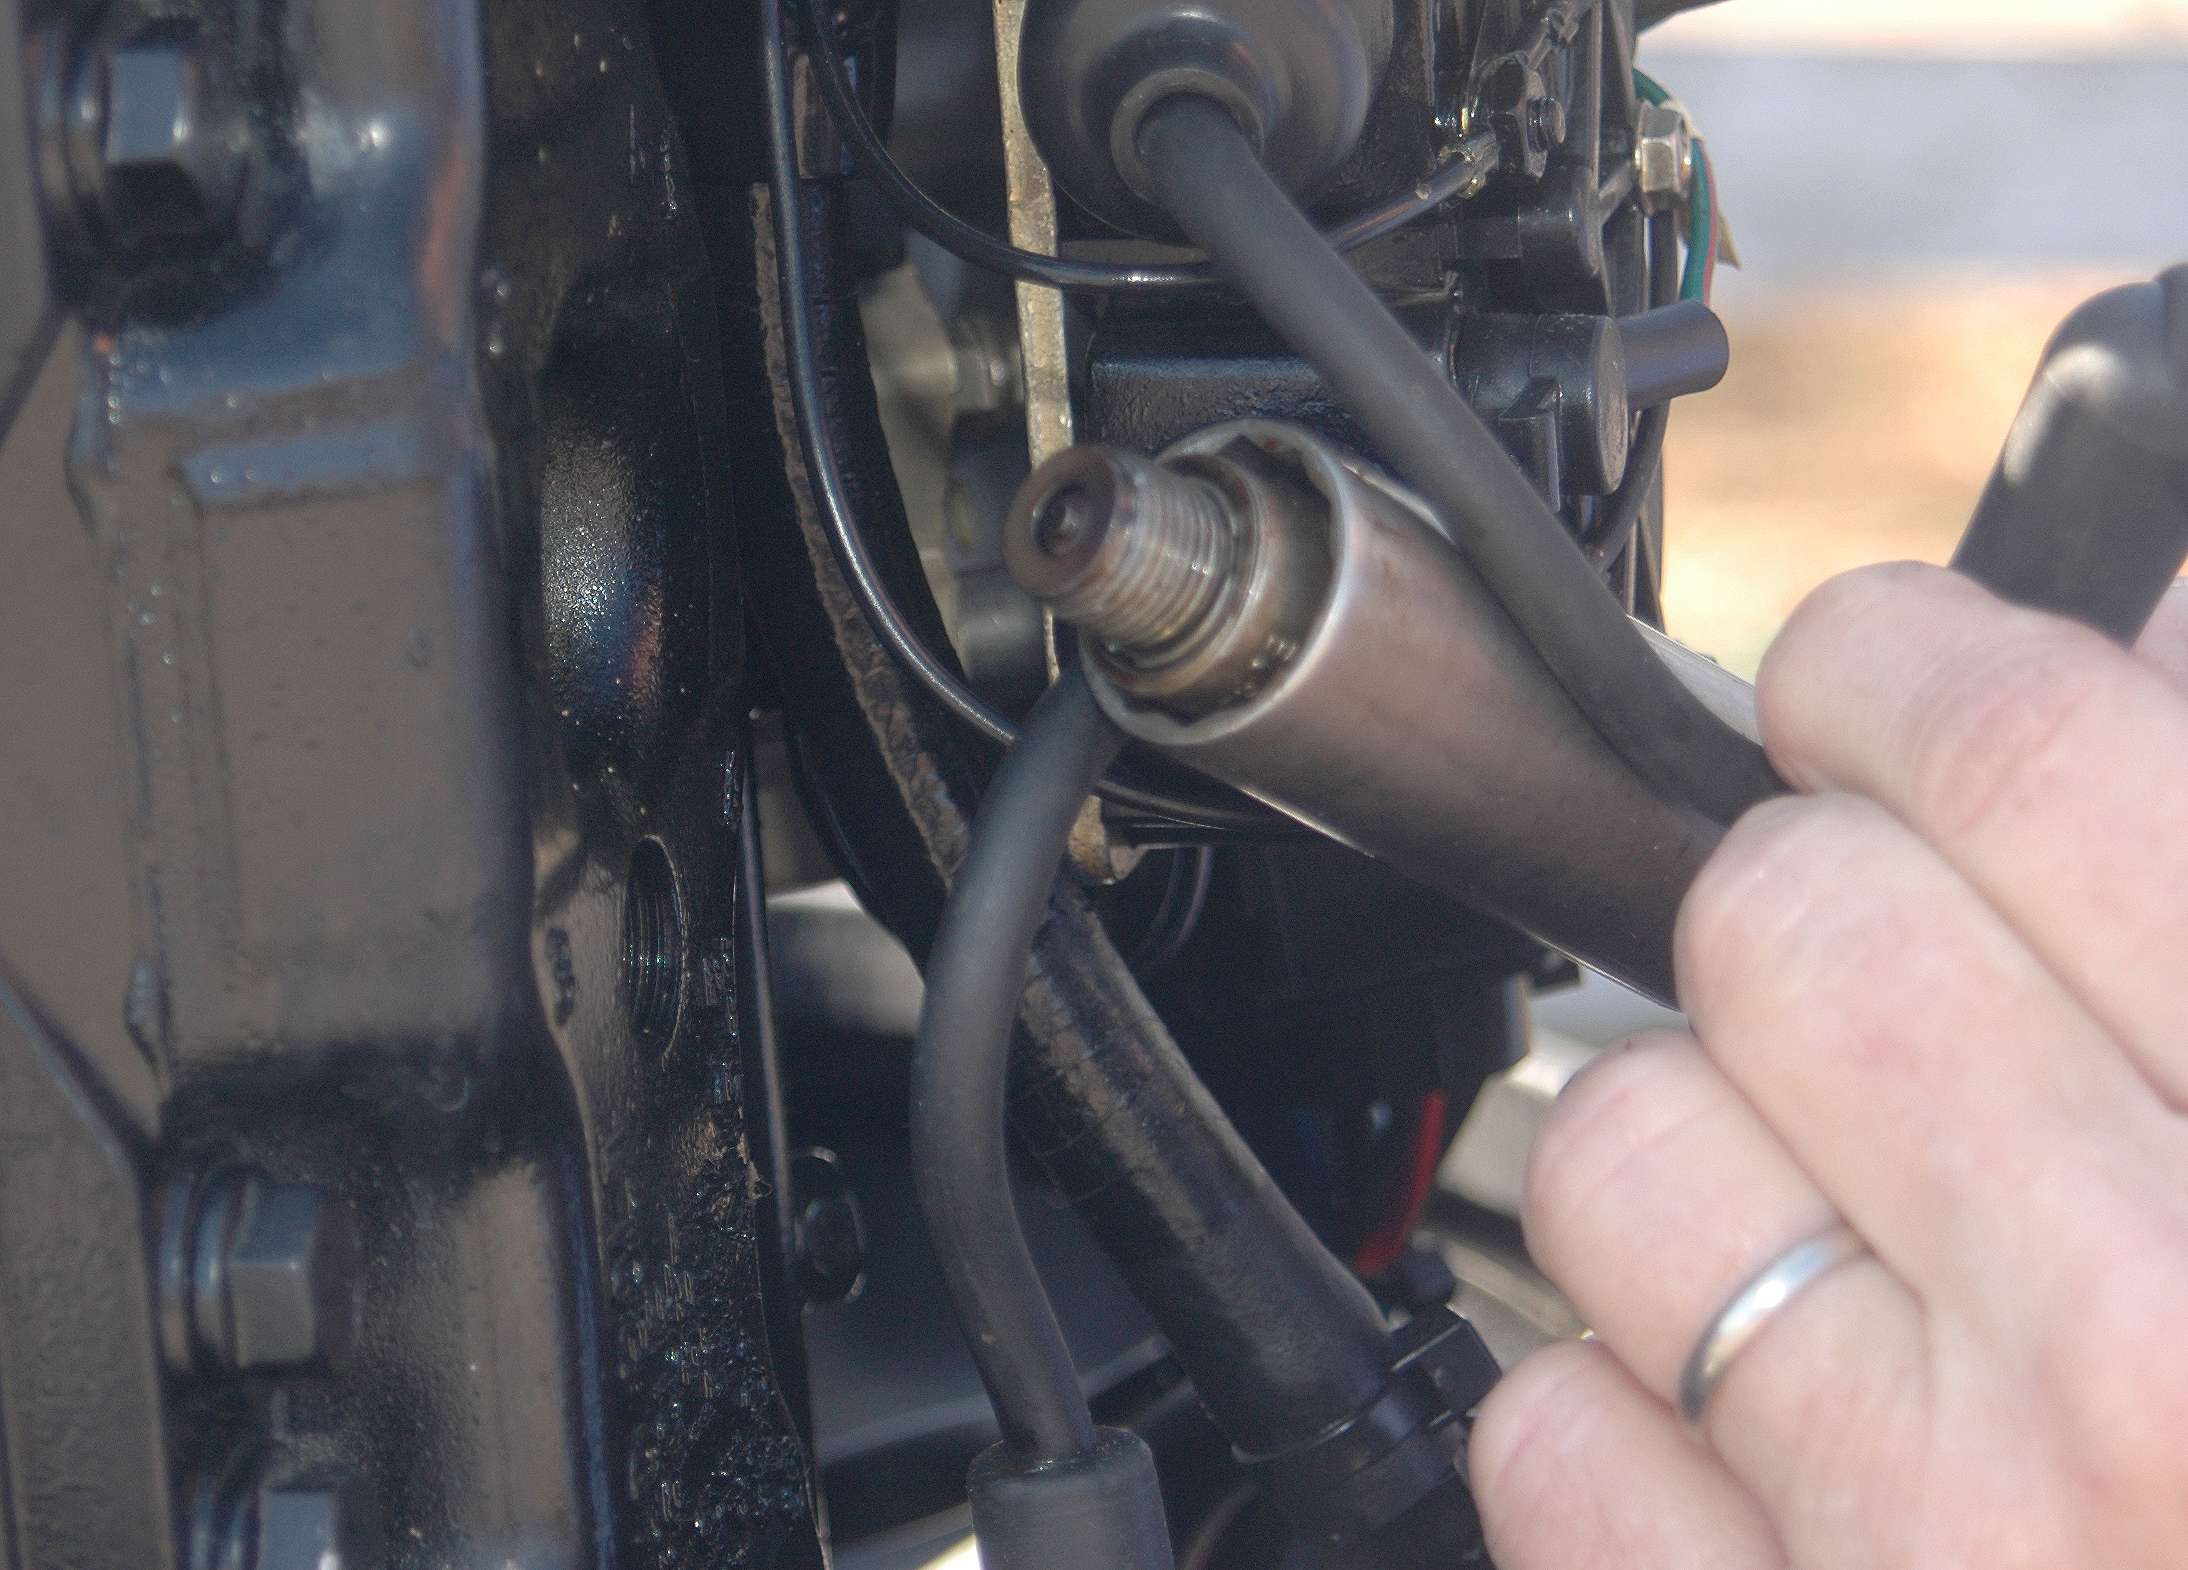 After the outboard idles for five to 10 minutes, shut it off. Remove and replace the spark plugs one at a time while doing the compression test.